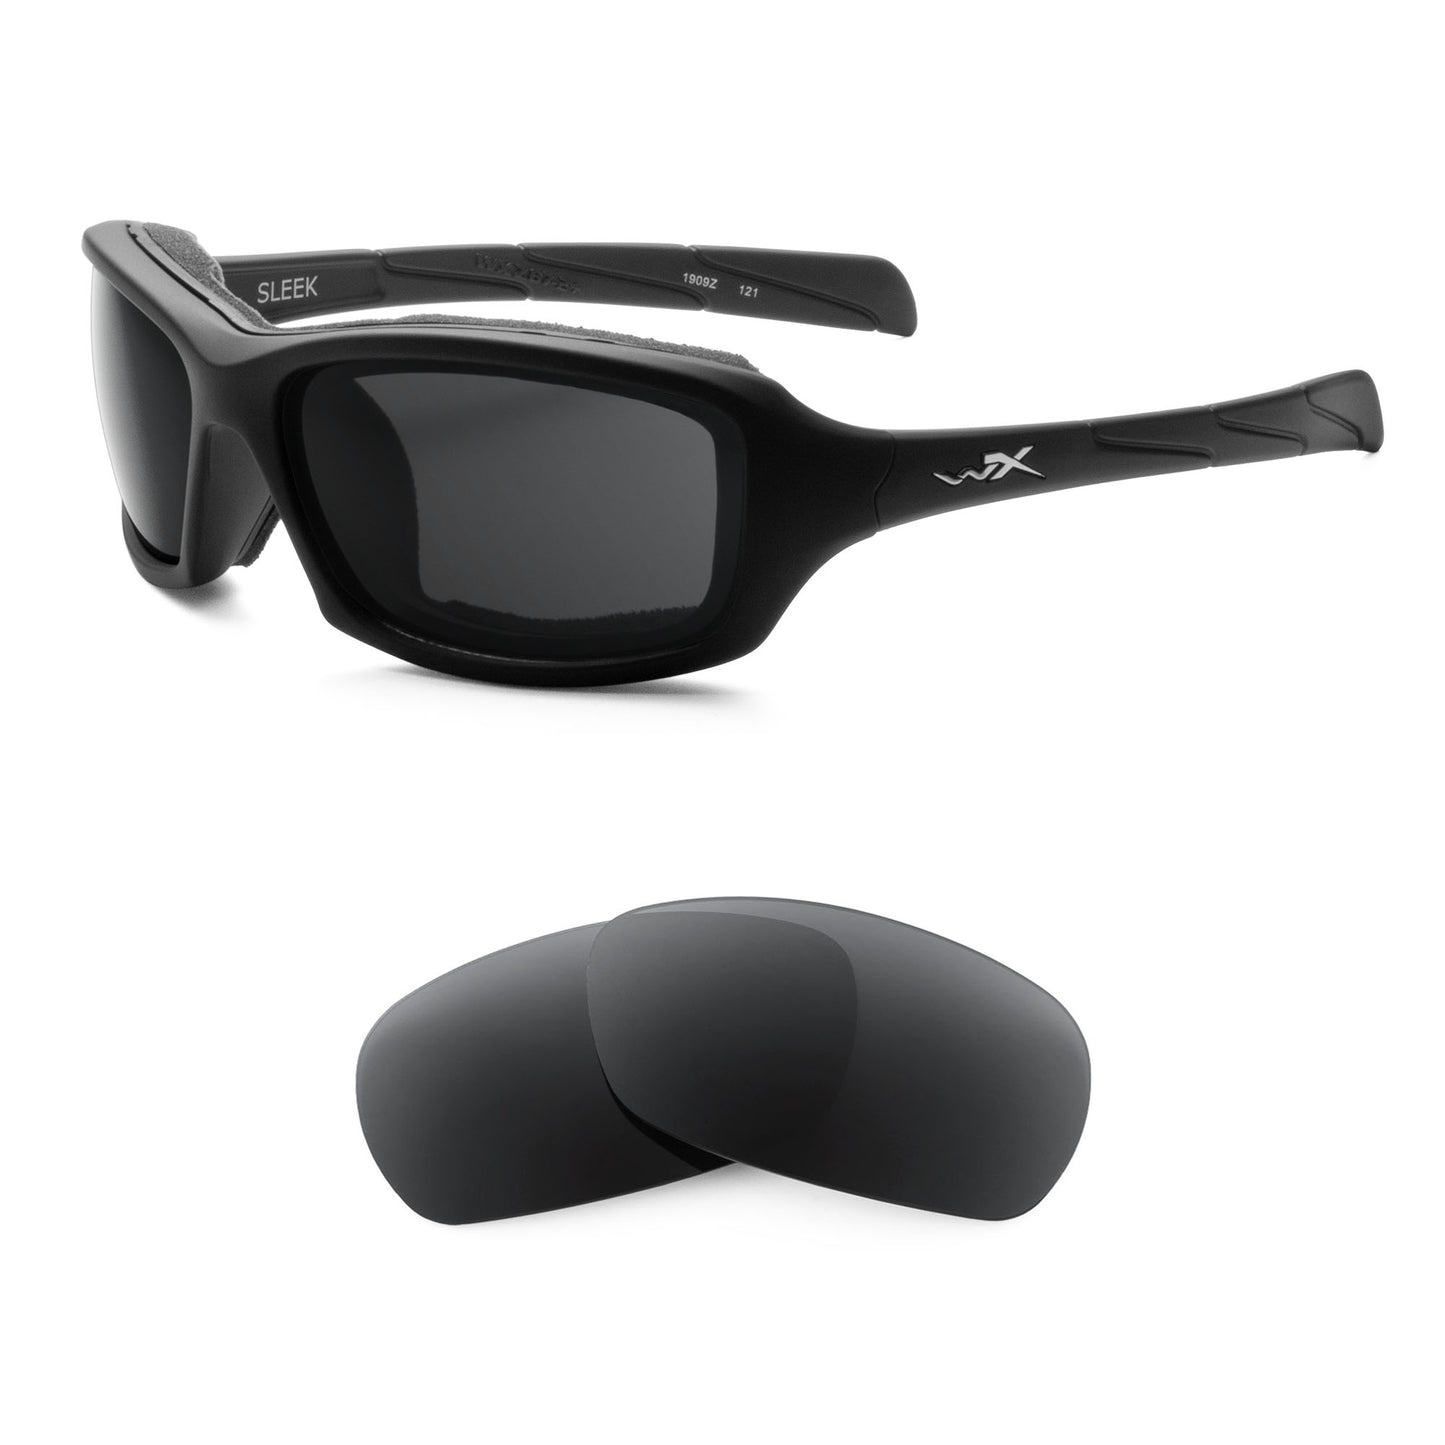 Wiley X Sleek sunglasses with replacement lenses